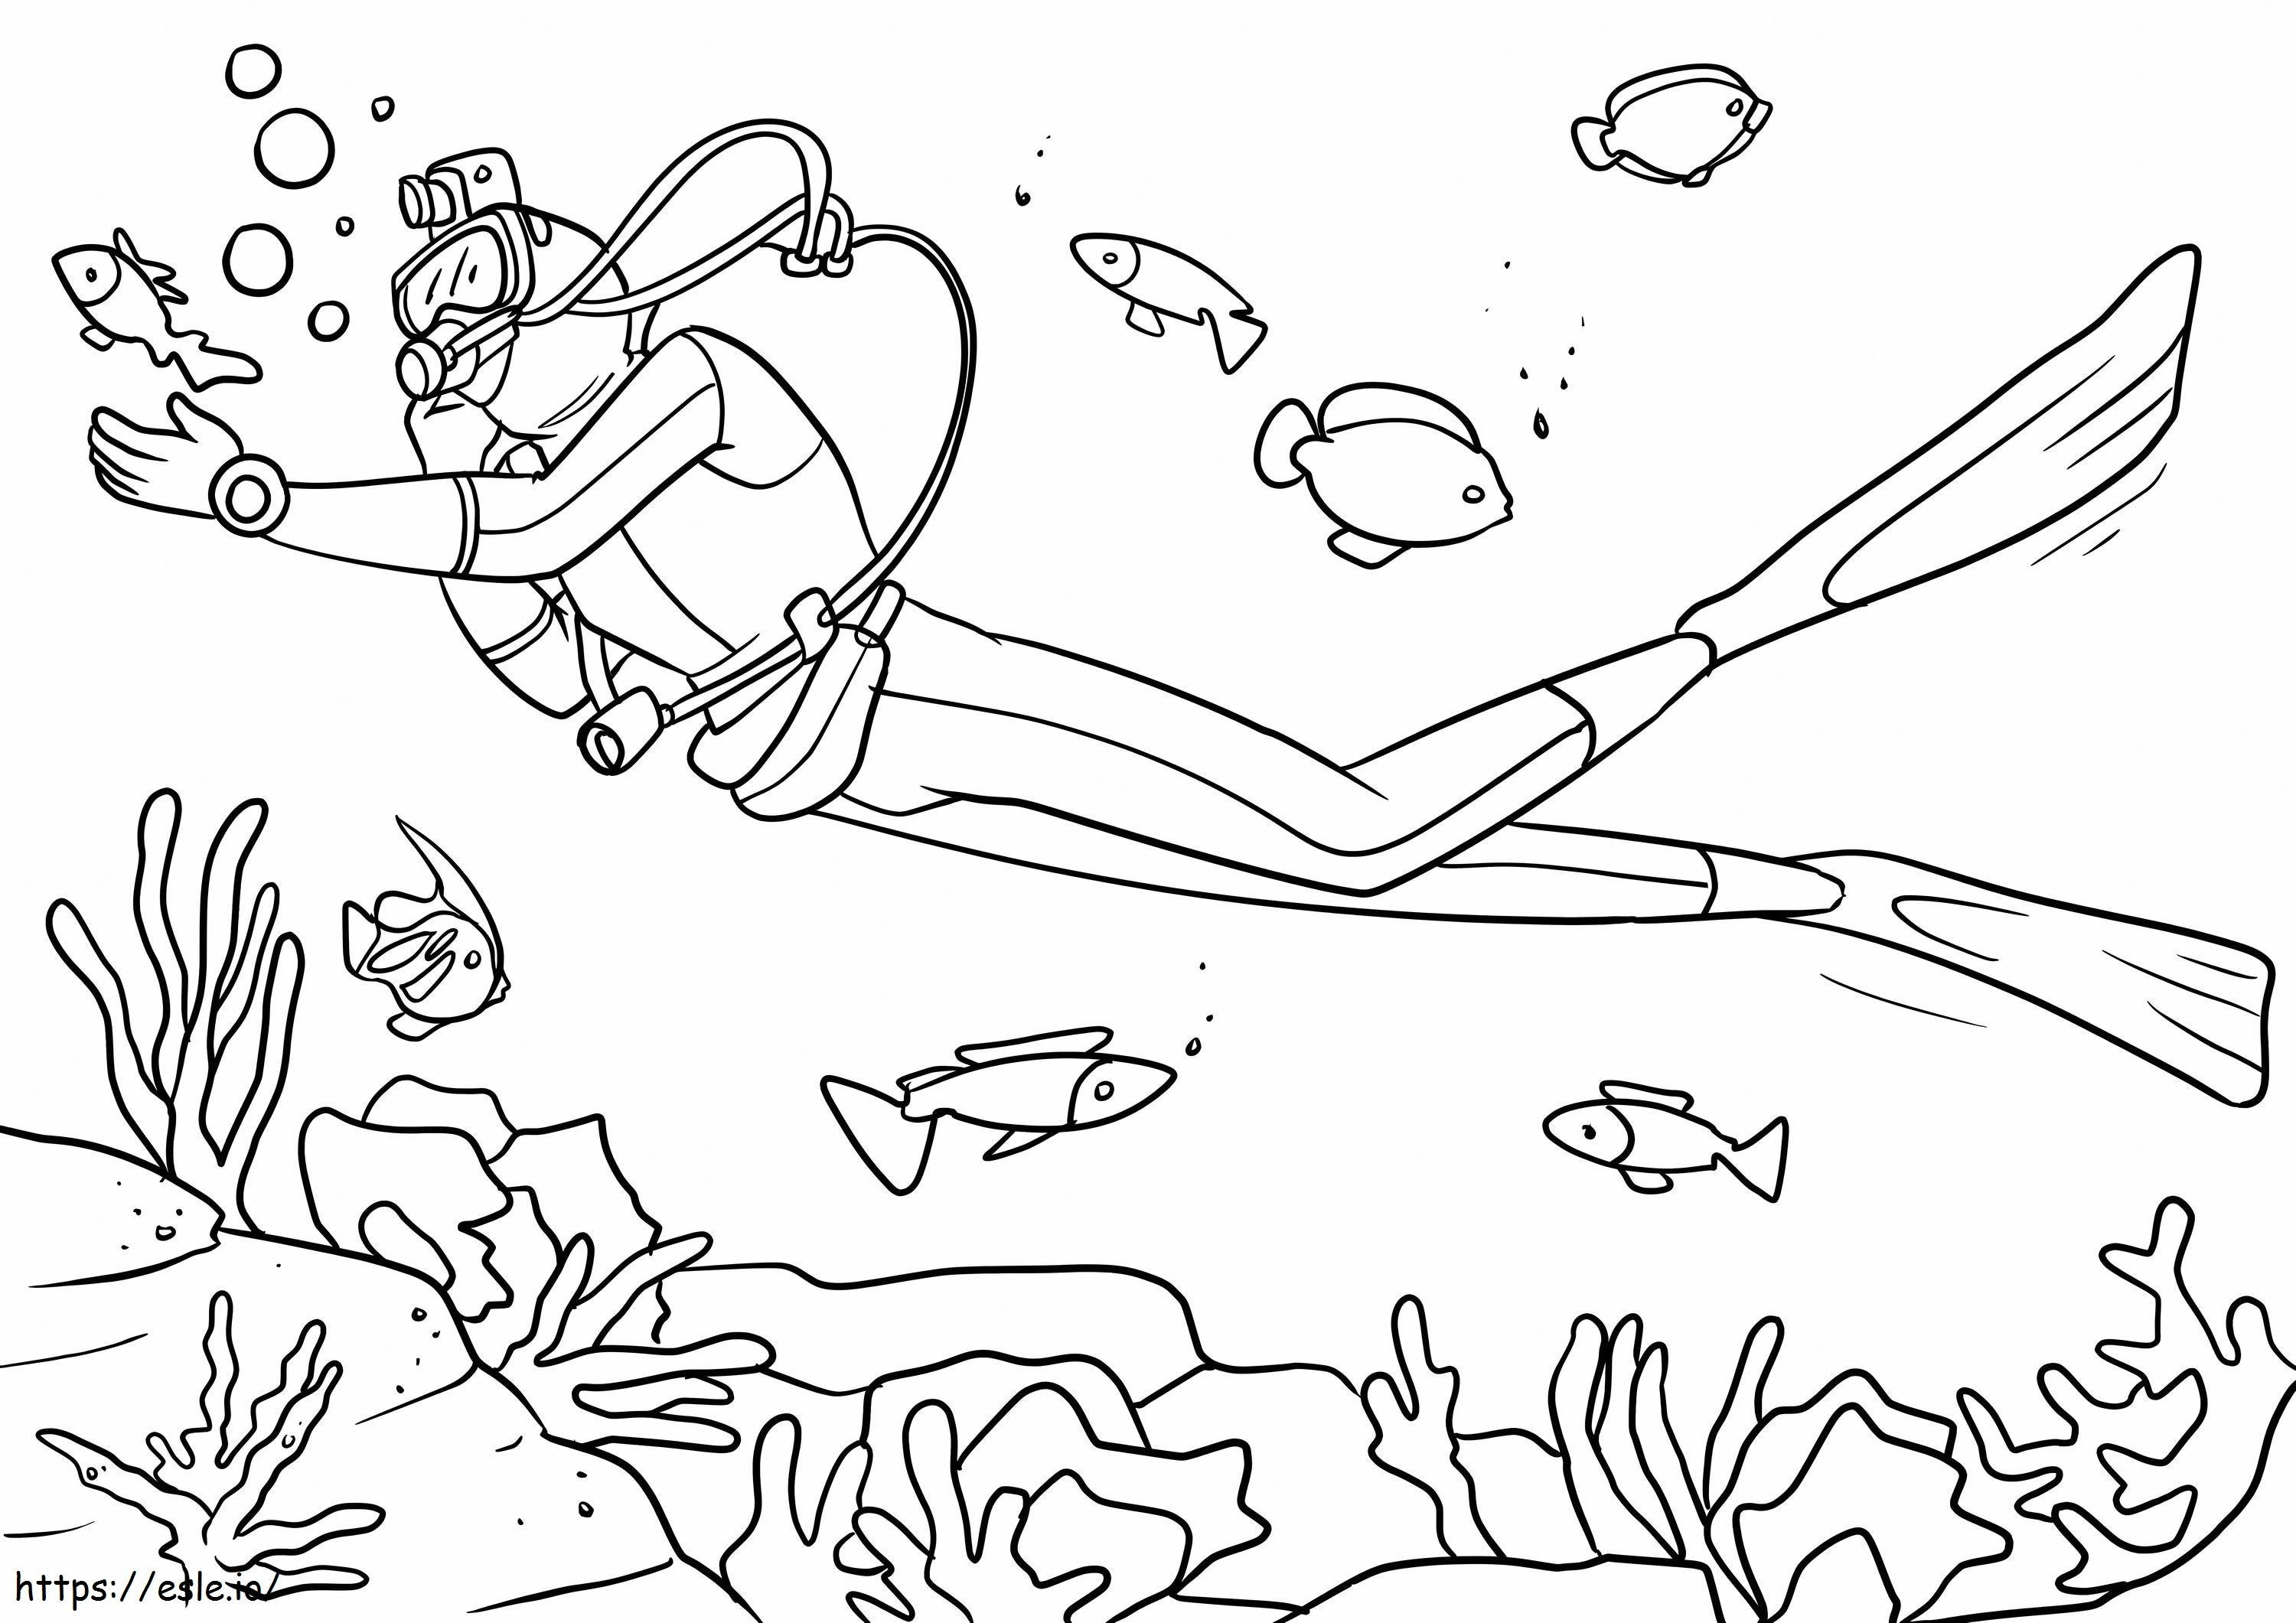 Great Diver coloring page